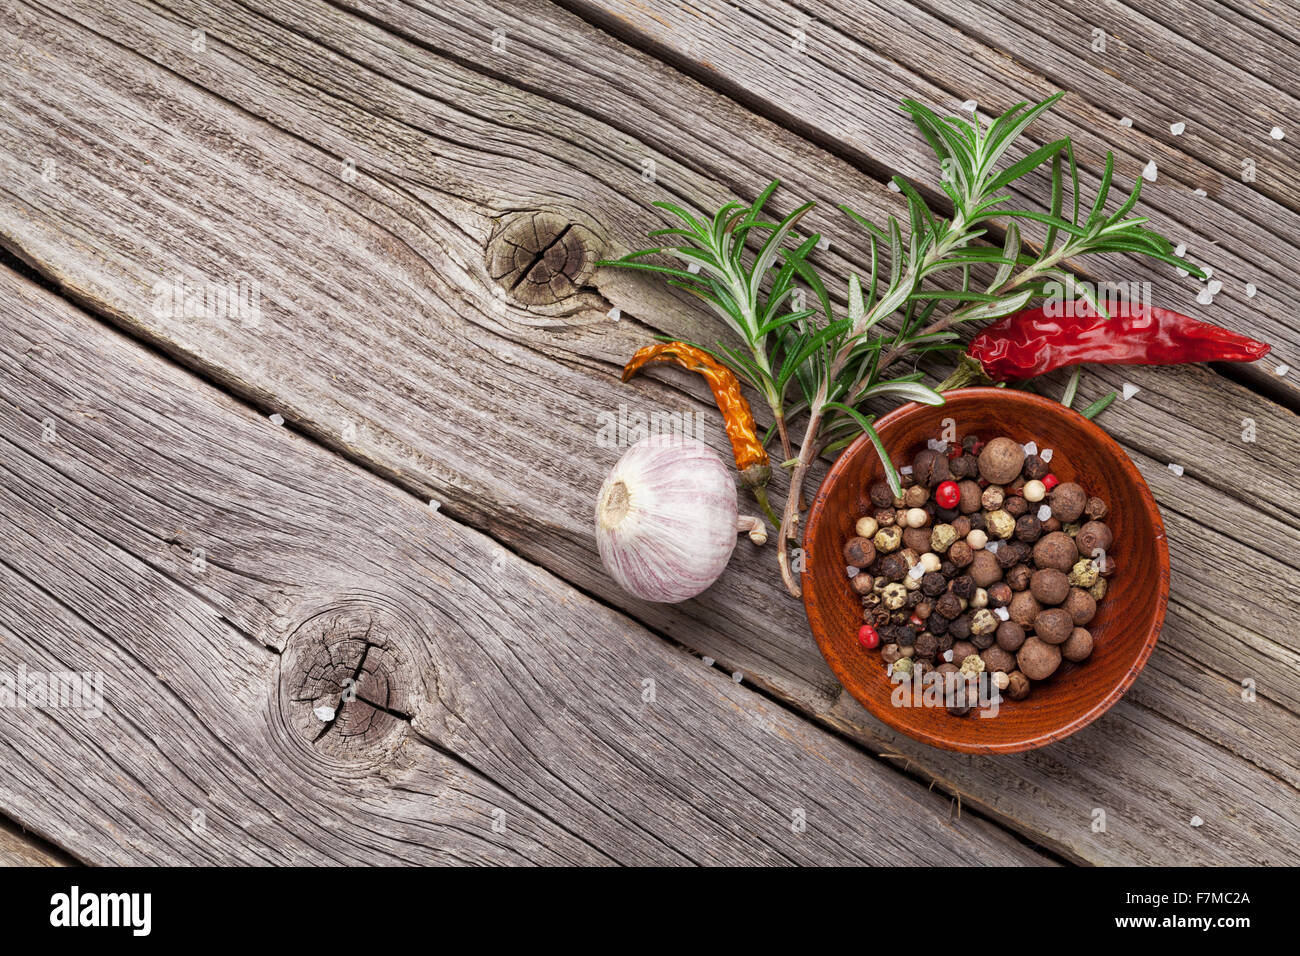 Herbs and spices on wooden table with copy space Stock Photo